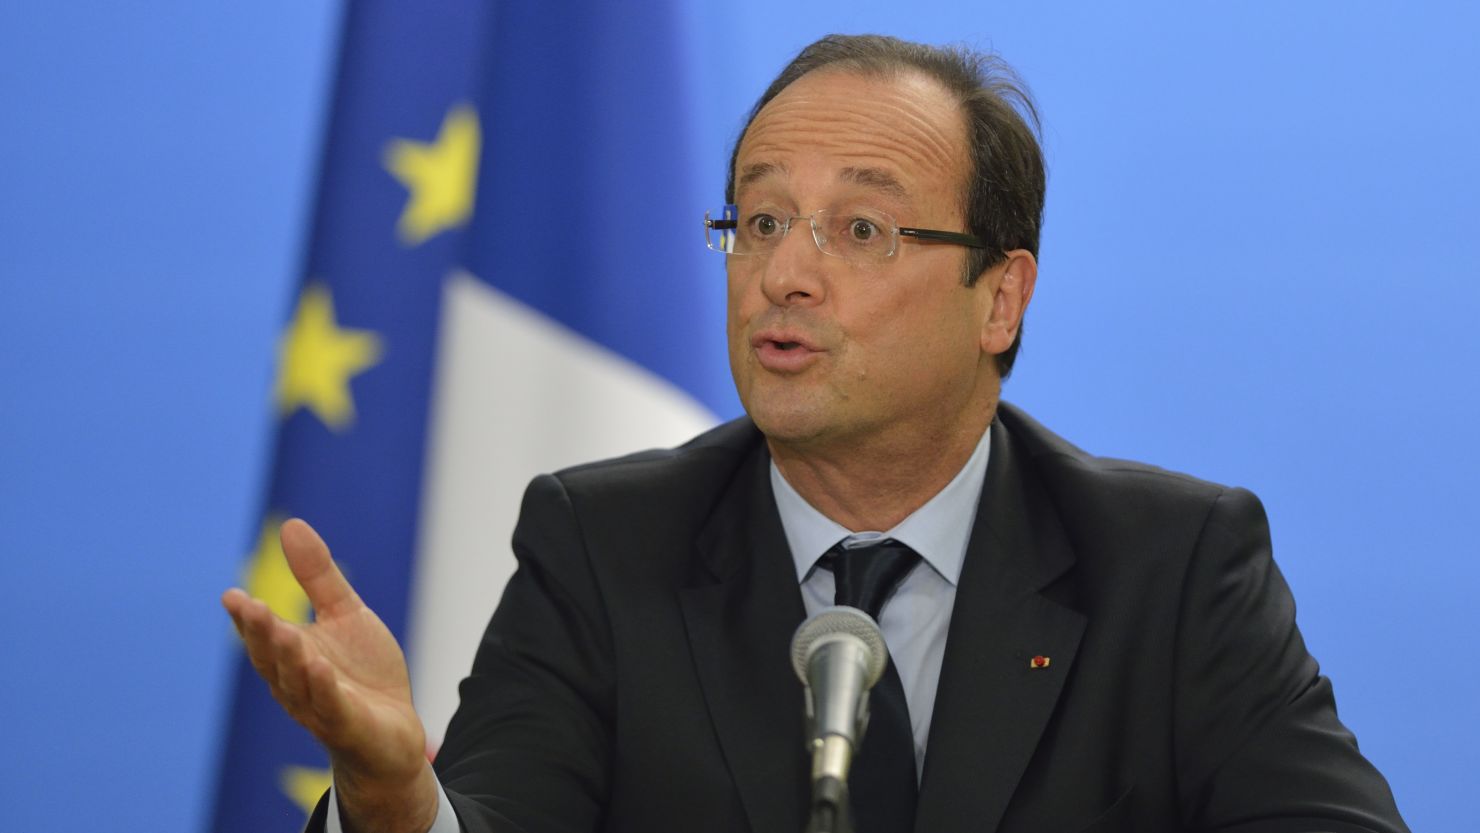 The 2013 budget is viewed as a test of confidence for French President Francois Hollande and his Socialist government.